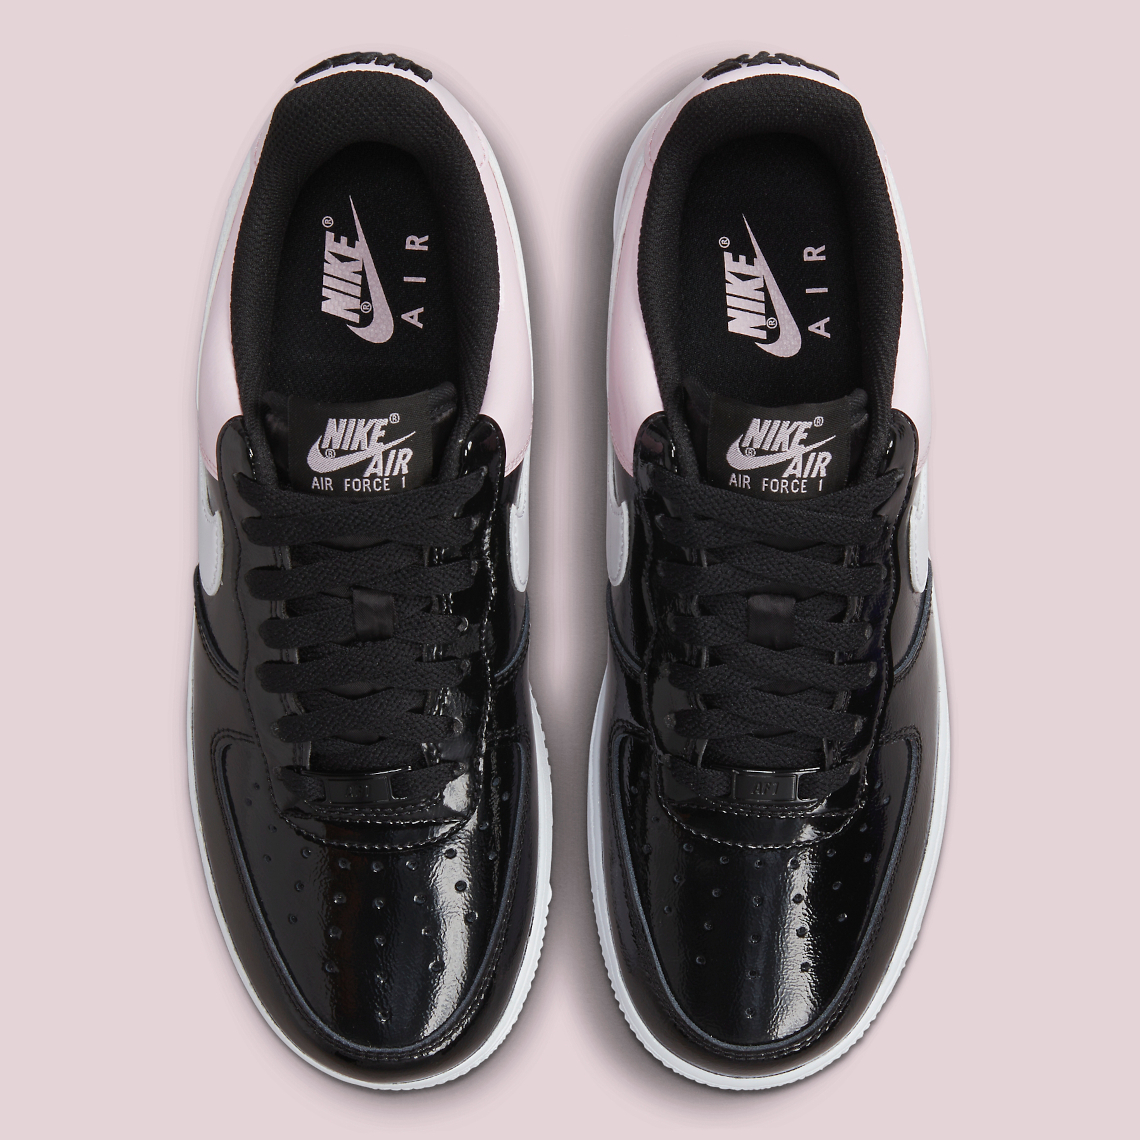 Nike Air Force 1 Black Patent ❤ liked on Polyvore featuring shoes, nike, patent  leather shoes, black …